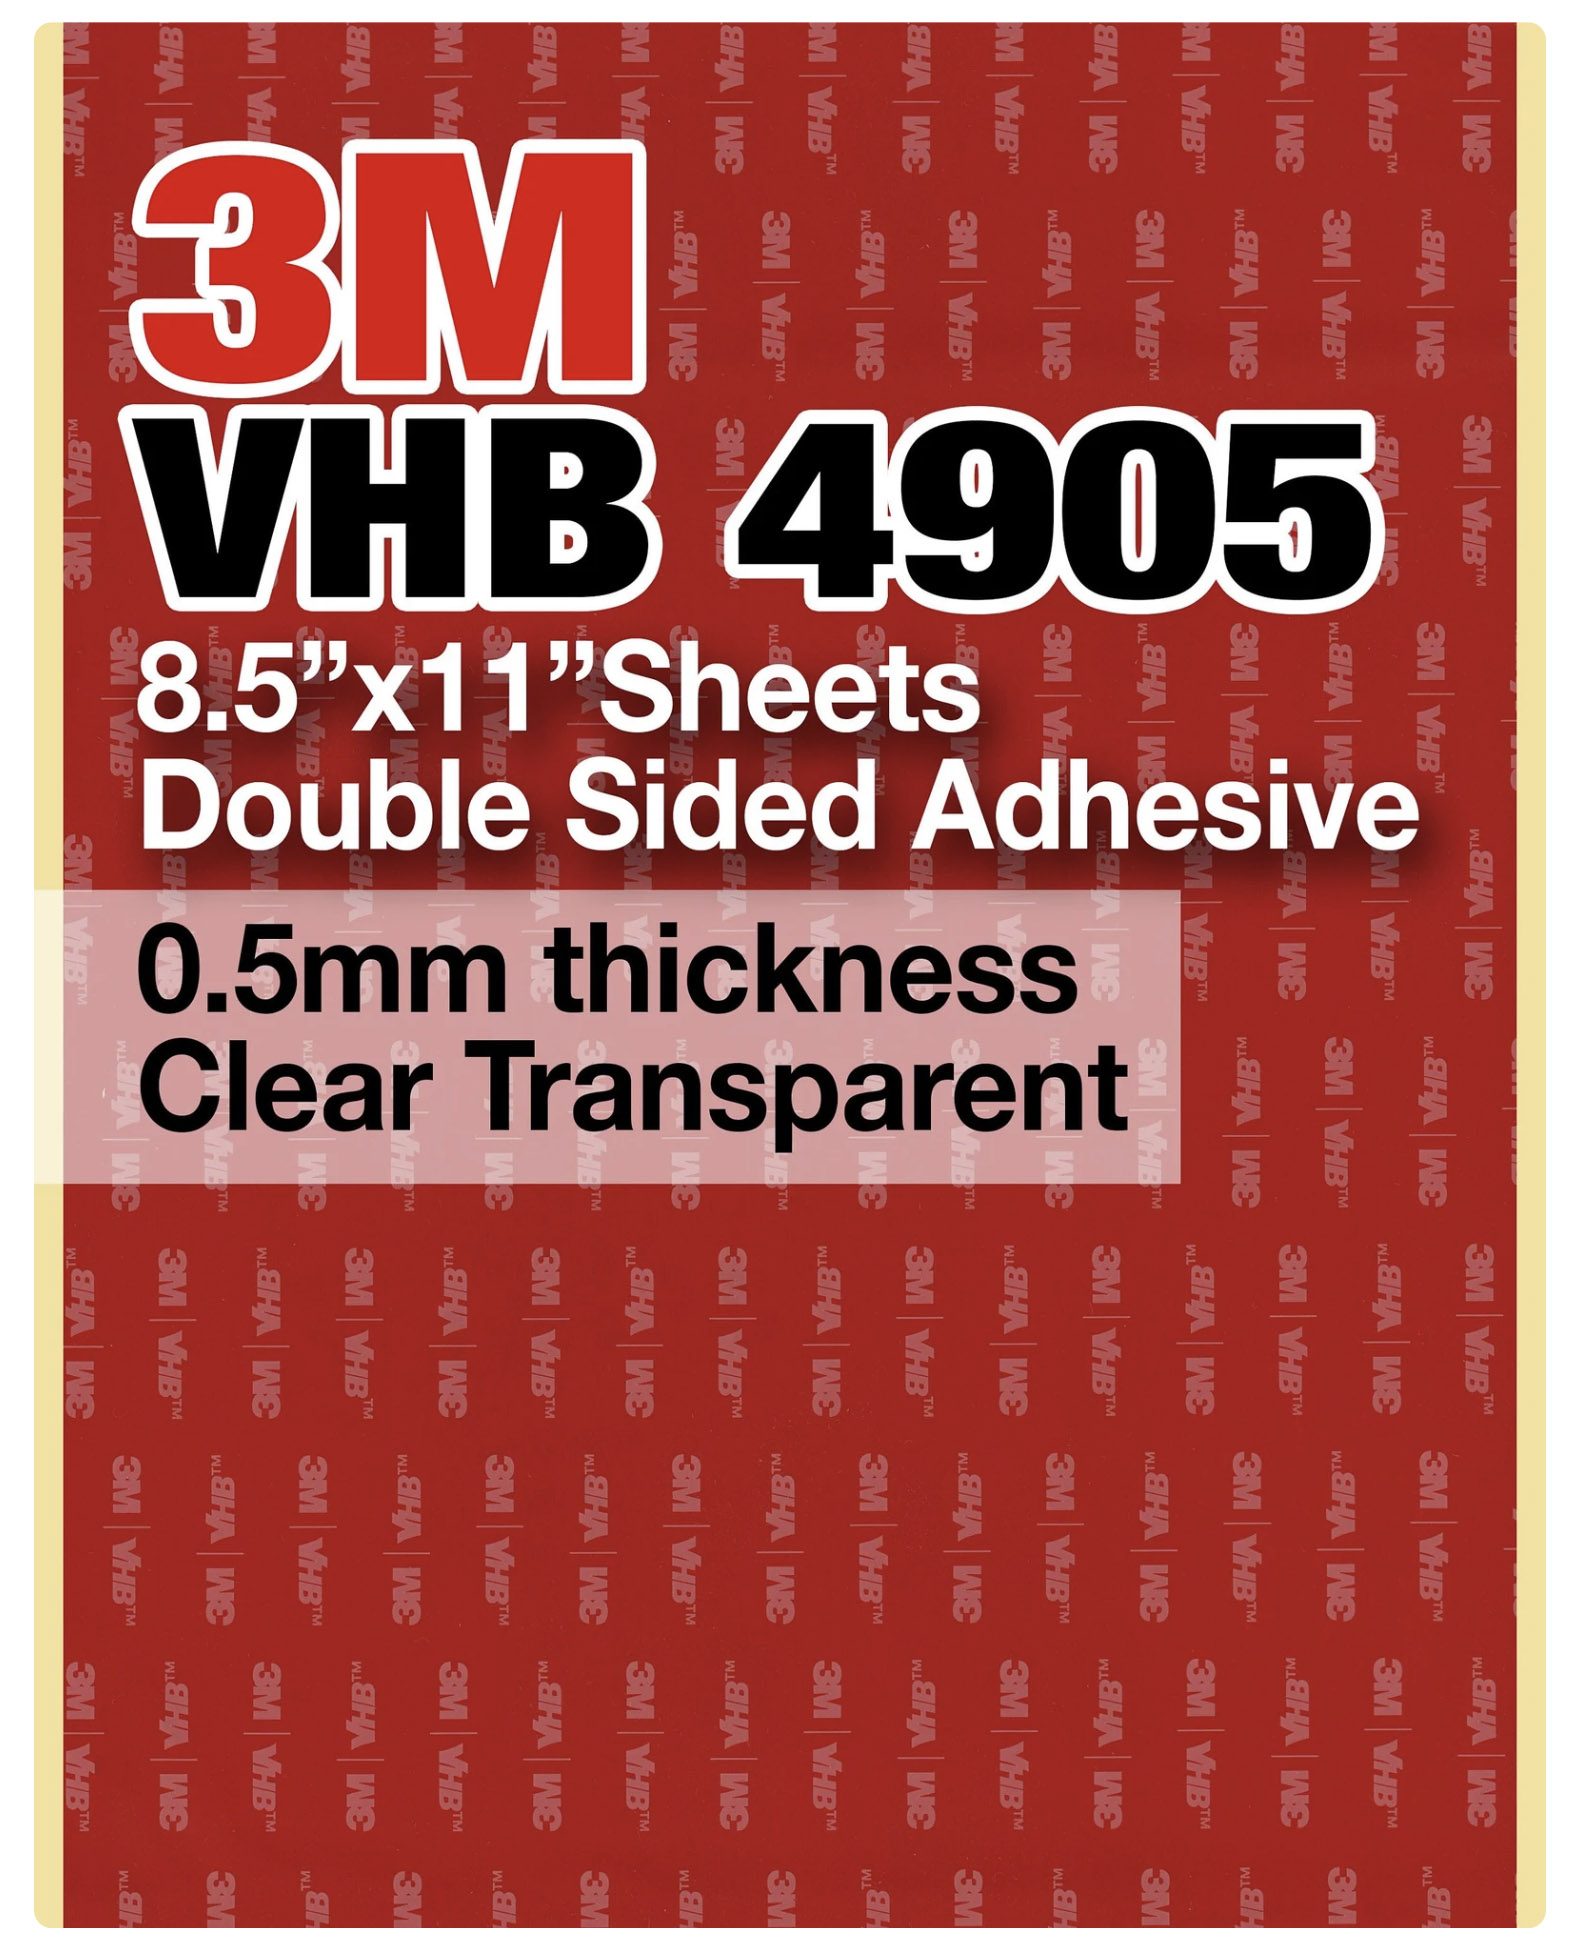 3M VHB 4920 8.5x11 Double Sided Strong Adhesive 0.4mm thickness white  sheets